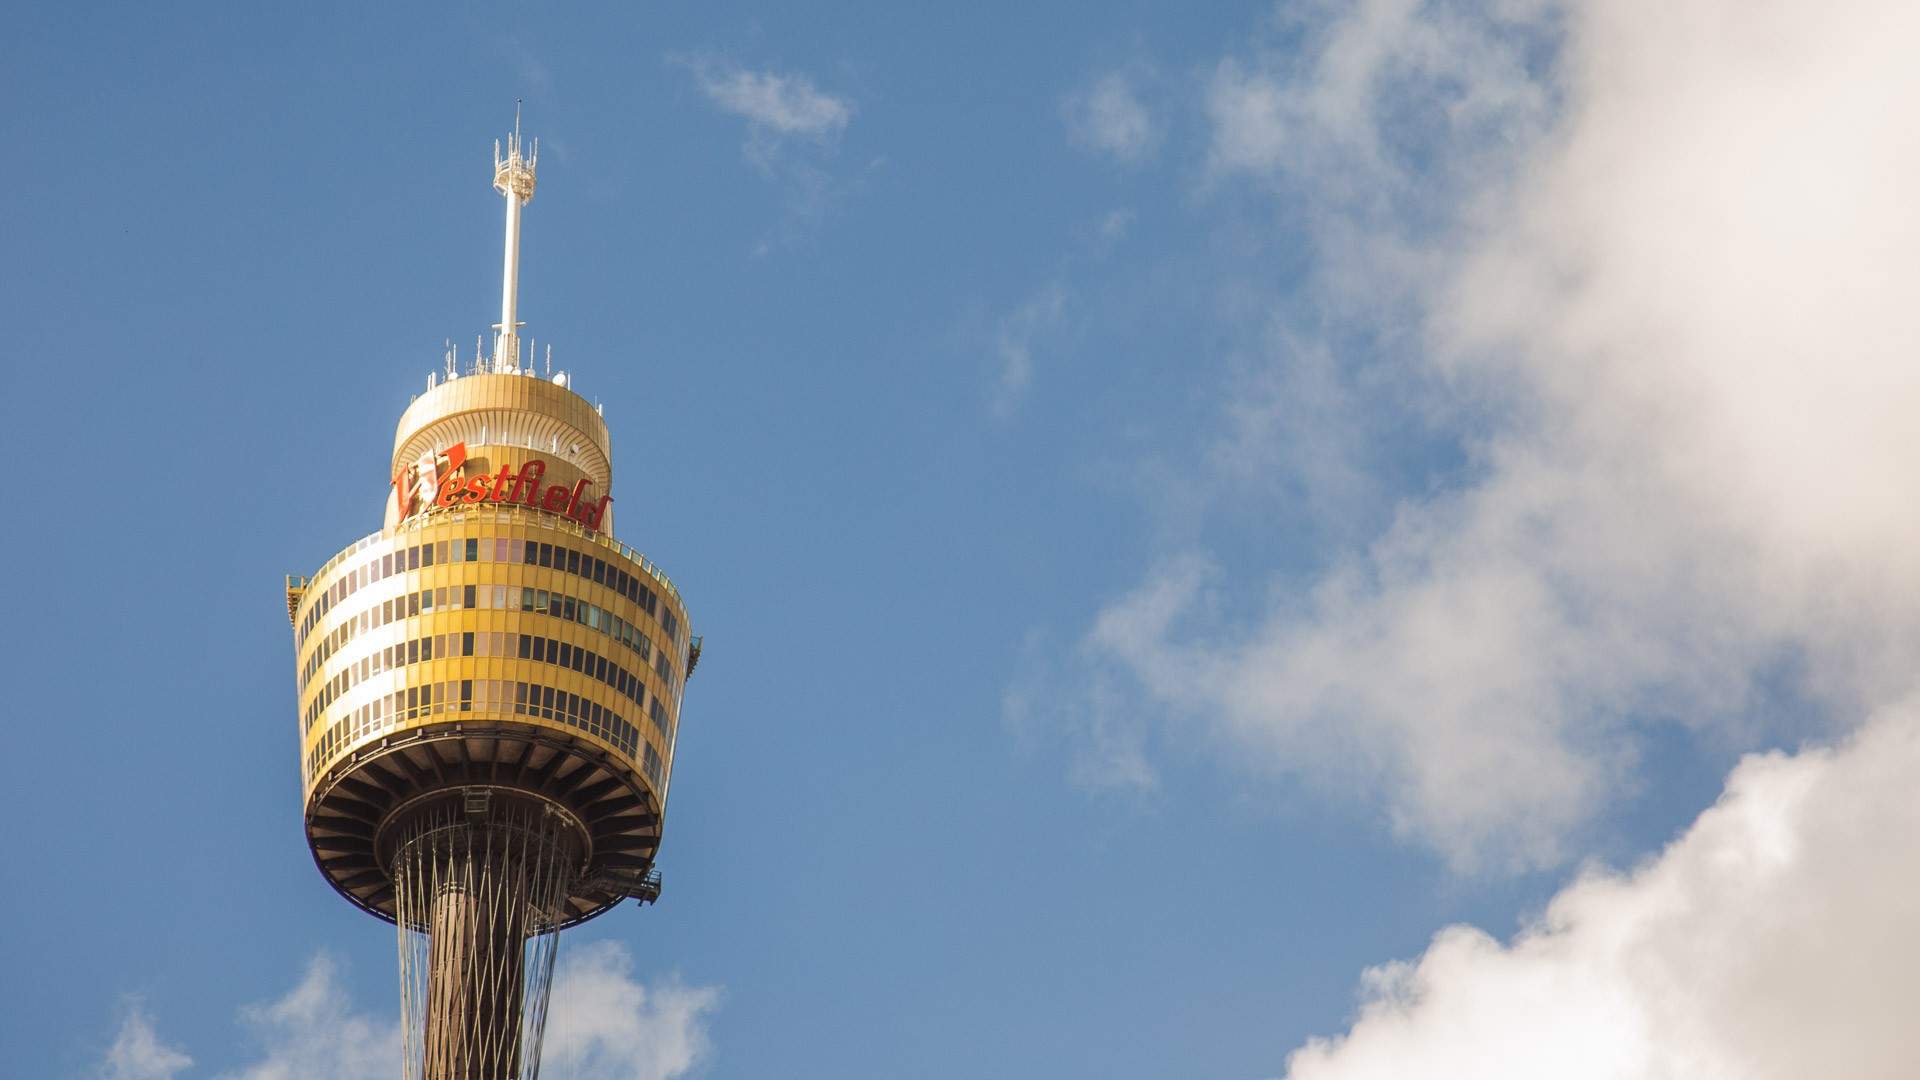 Sydney Tower Is Getting a Multimillion-Dollar Dining Precinct with Three Levels of Food and Drink Spots